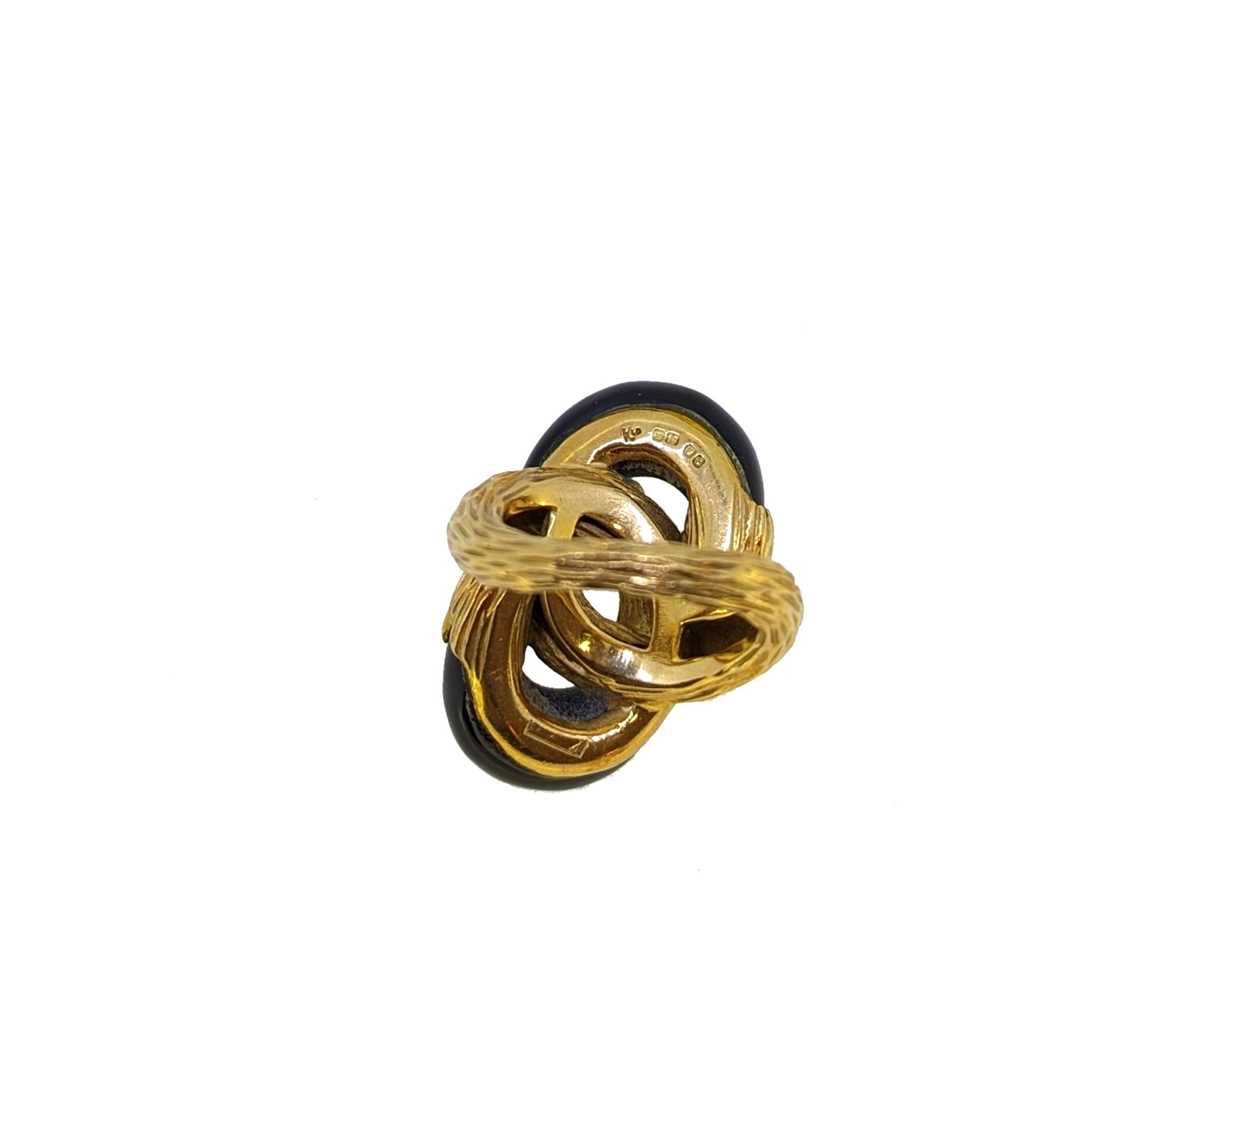 Kutchinsky - An 18ct gold onyx ring, - Image 4 of 6